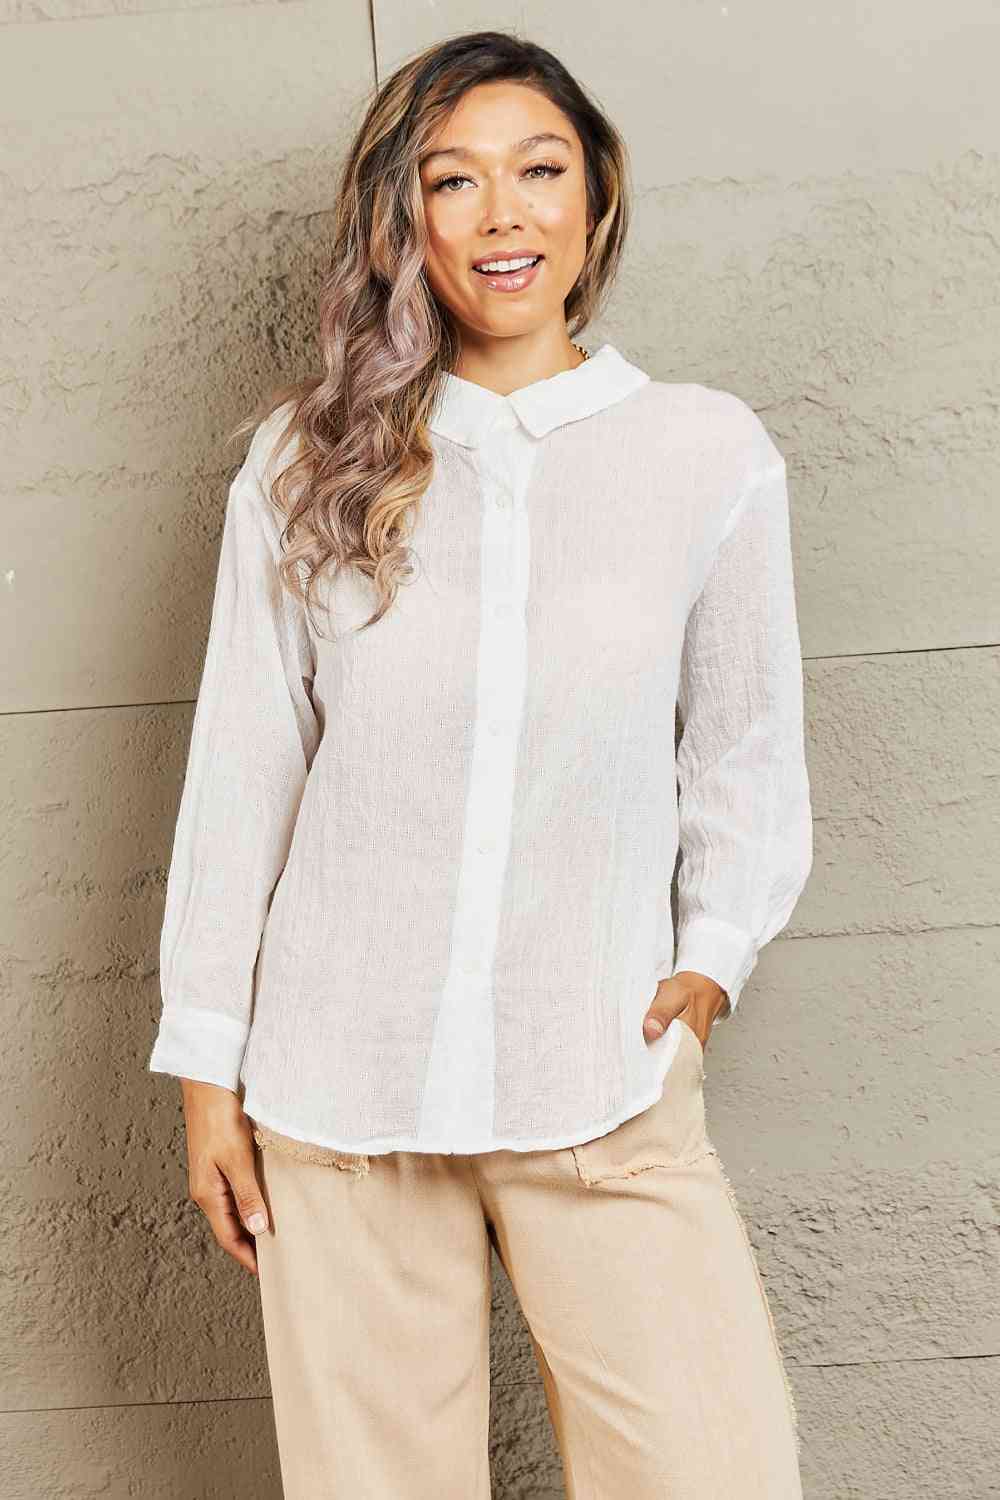 Take Me Out Lightweight Button Down Top - White / XS - Camis & Tops - Shirts & Tops - 1 - 2024